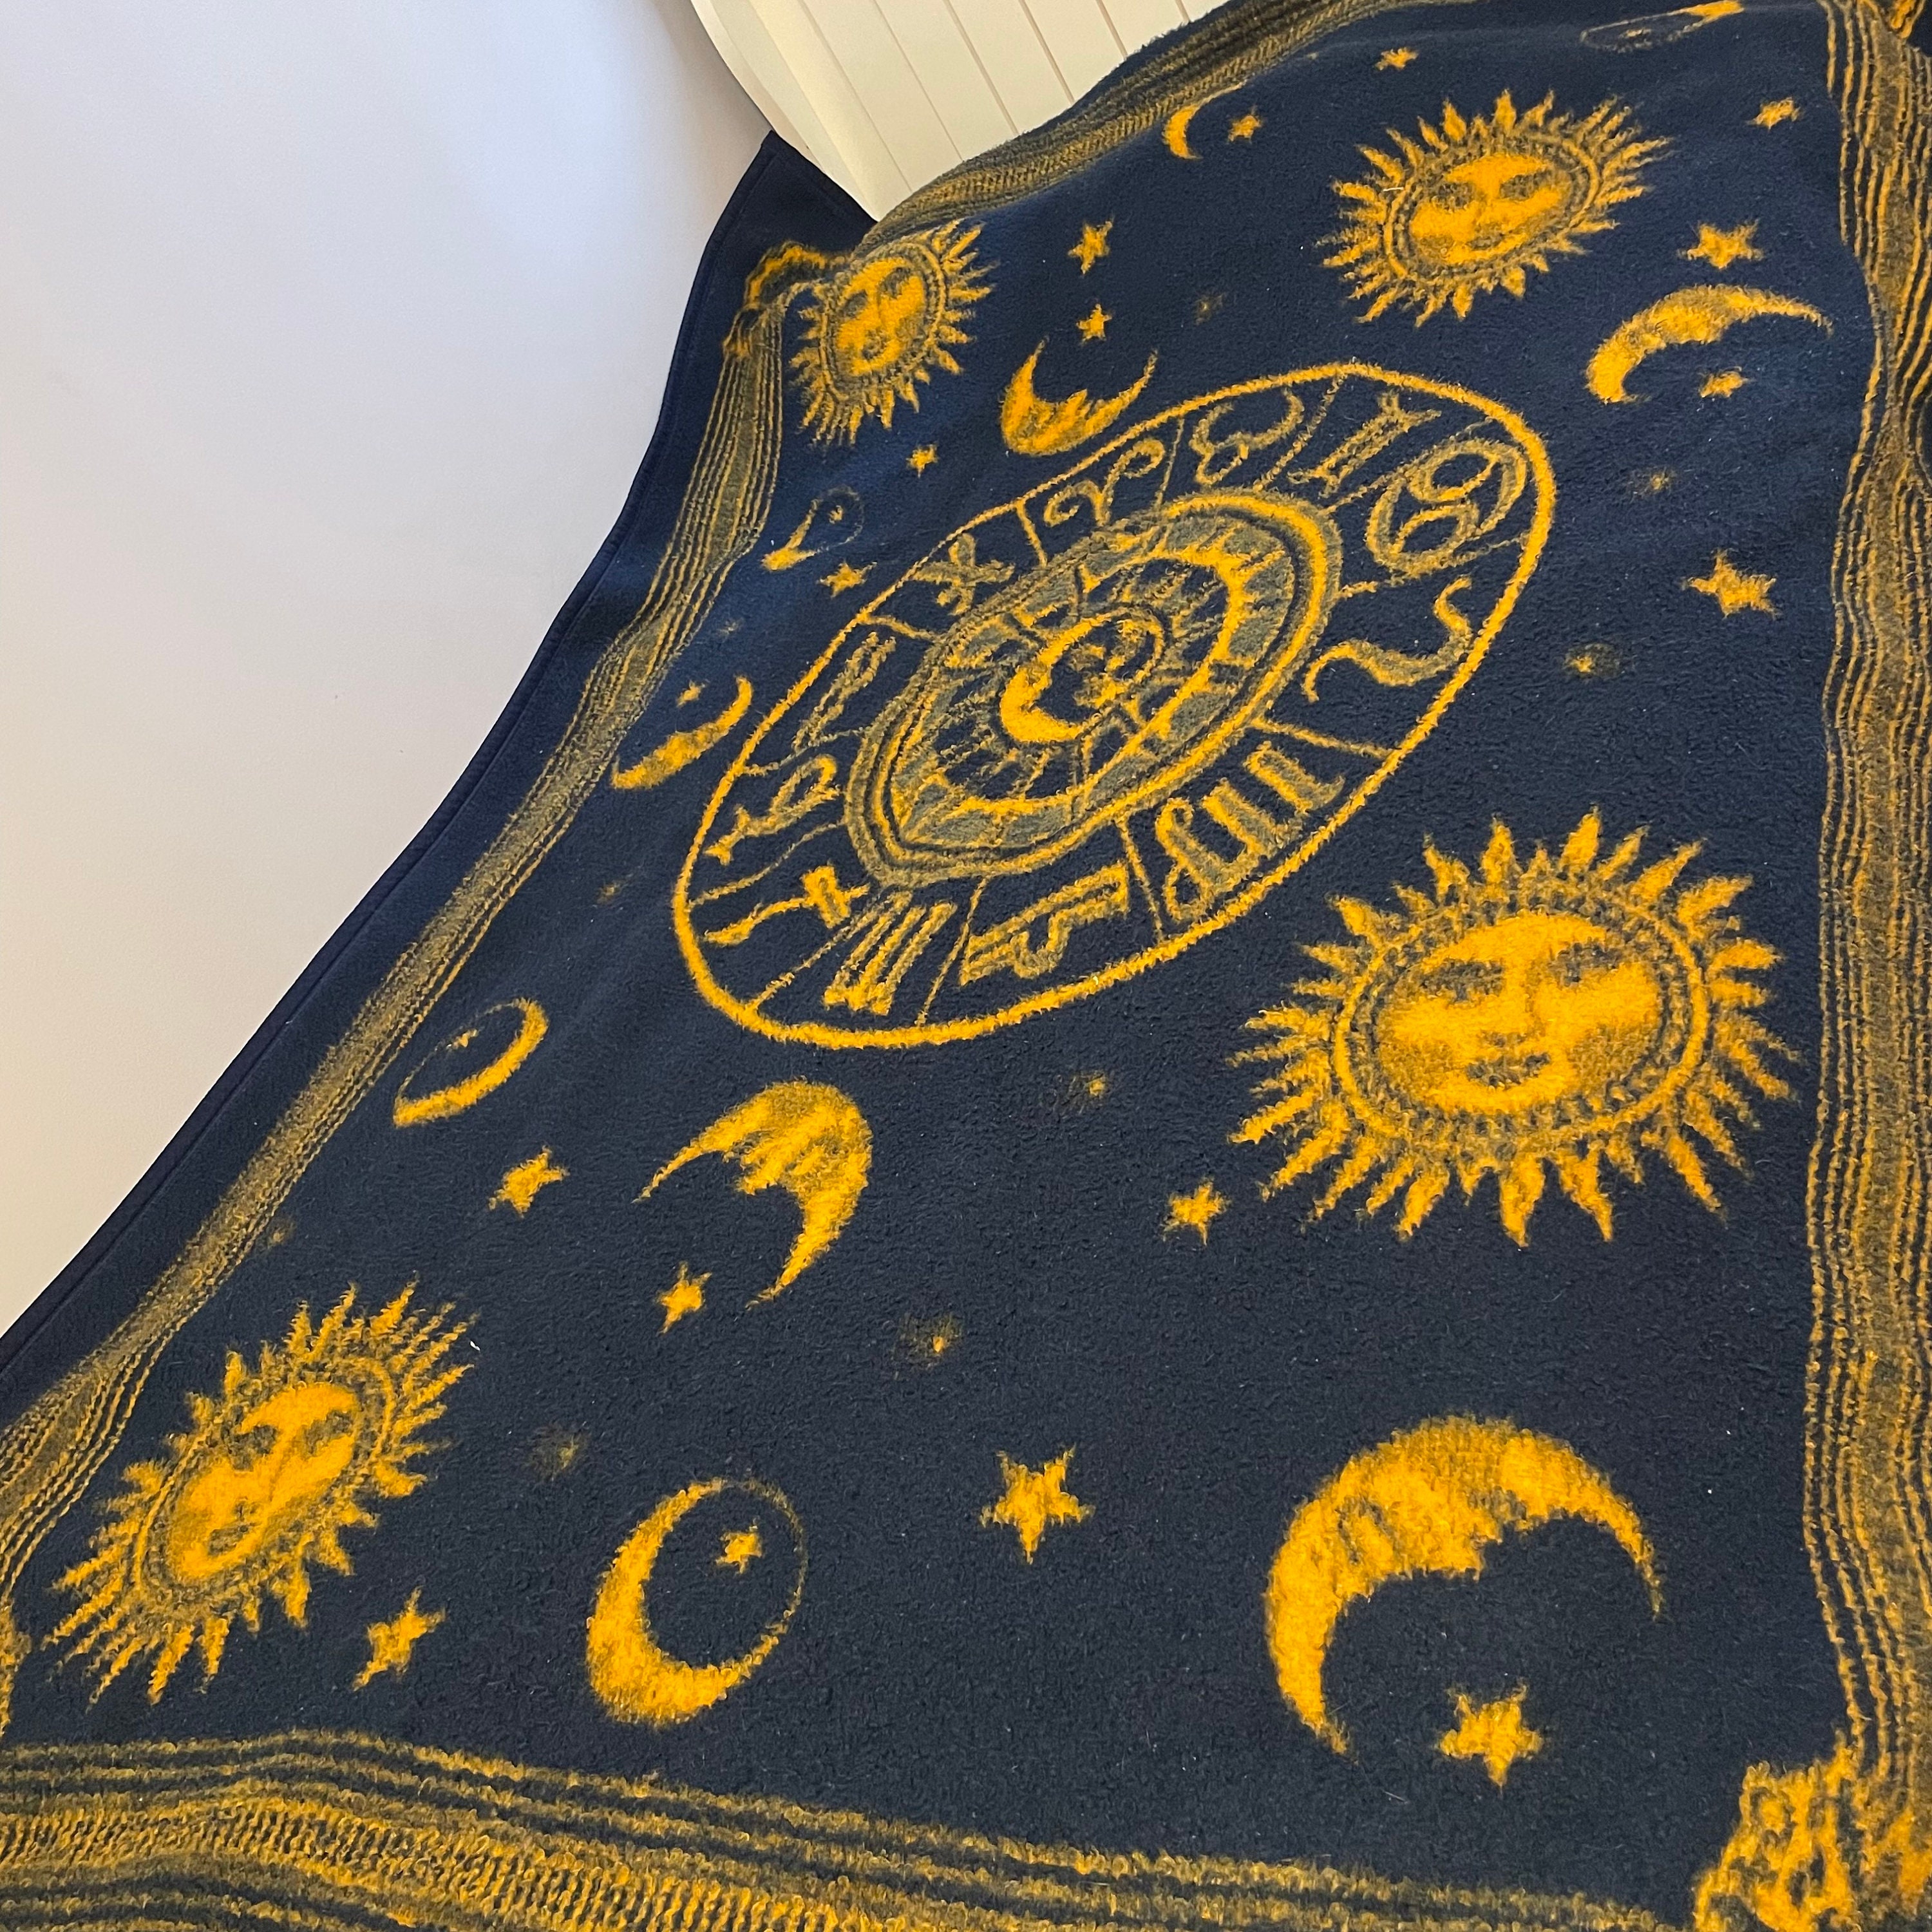 Stars Vintage Moon BIEDERLACK Etsy Made 80 Throw Celestial in Germany 57 Navy Sun Wheel - X Yellow With and Blue Blanket Blanket Reversible Zodiac